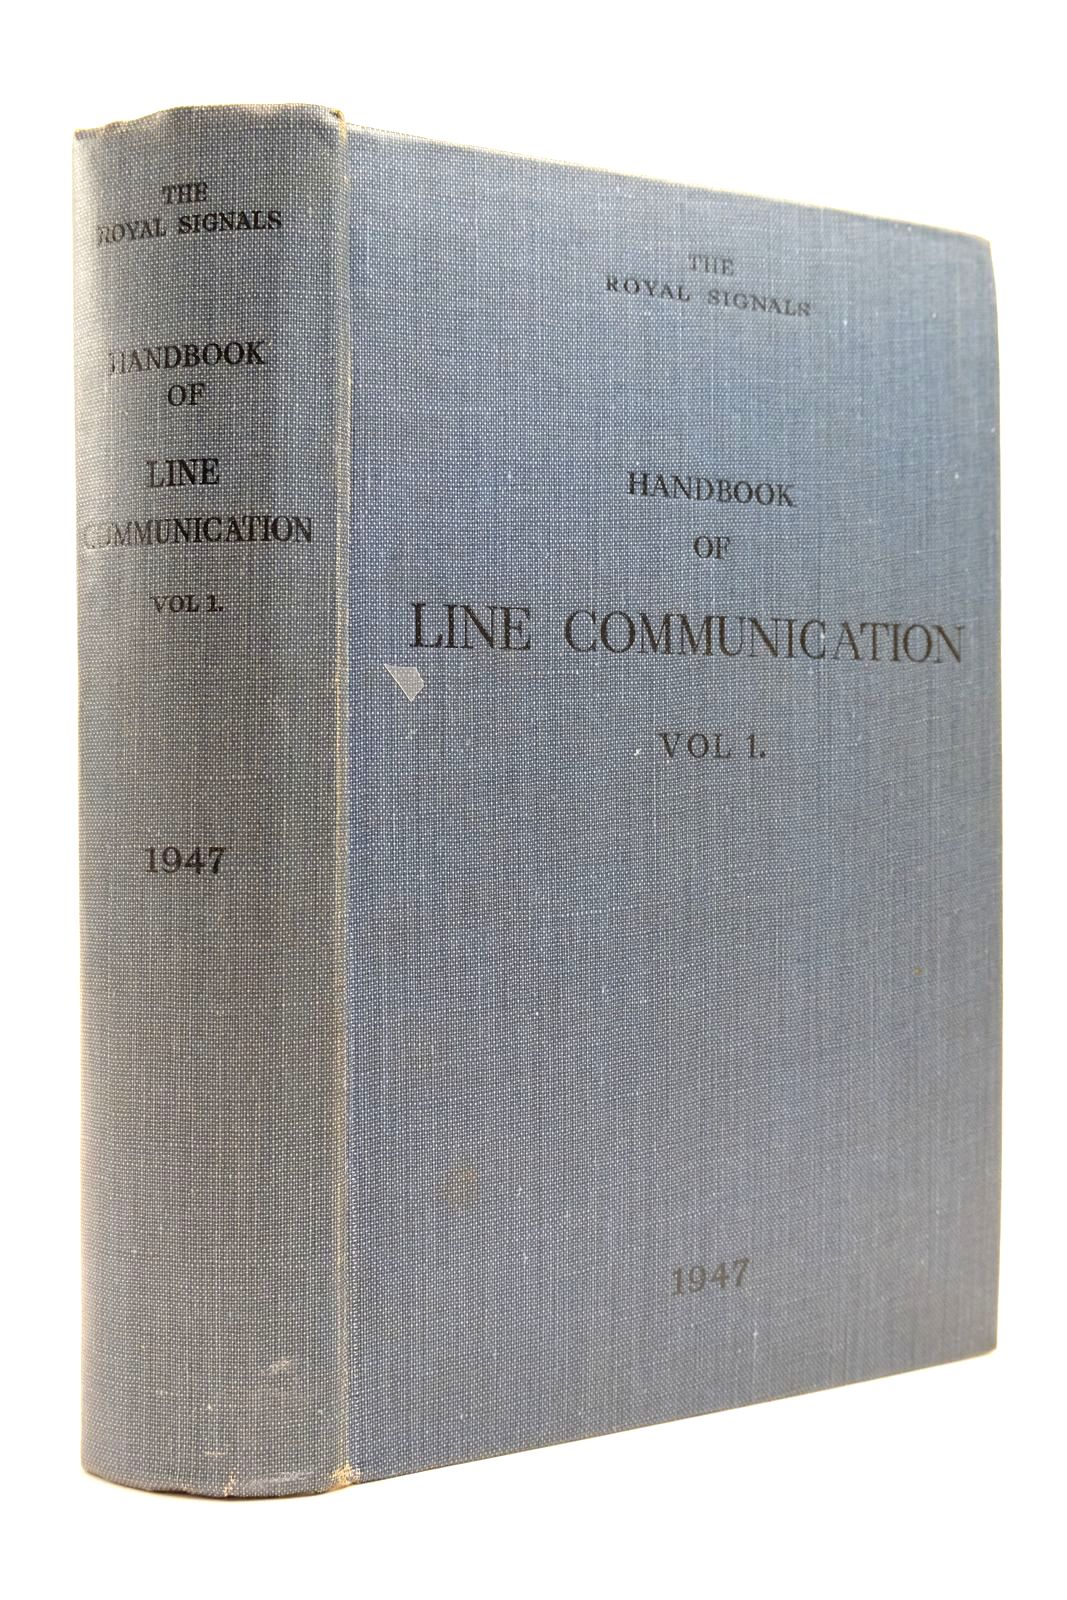 Photo of THE ROYAL SIGNALS HANDBOOK OF LINE COMMUNICATION VOLUME I- Stock Number: 2139060